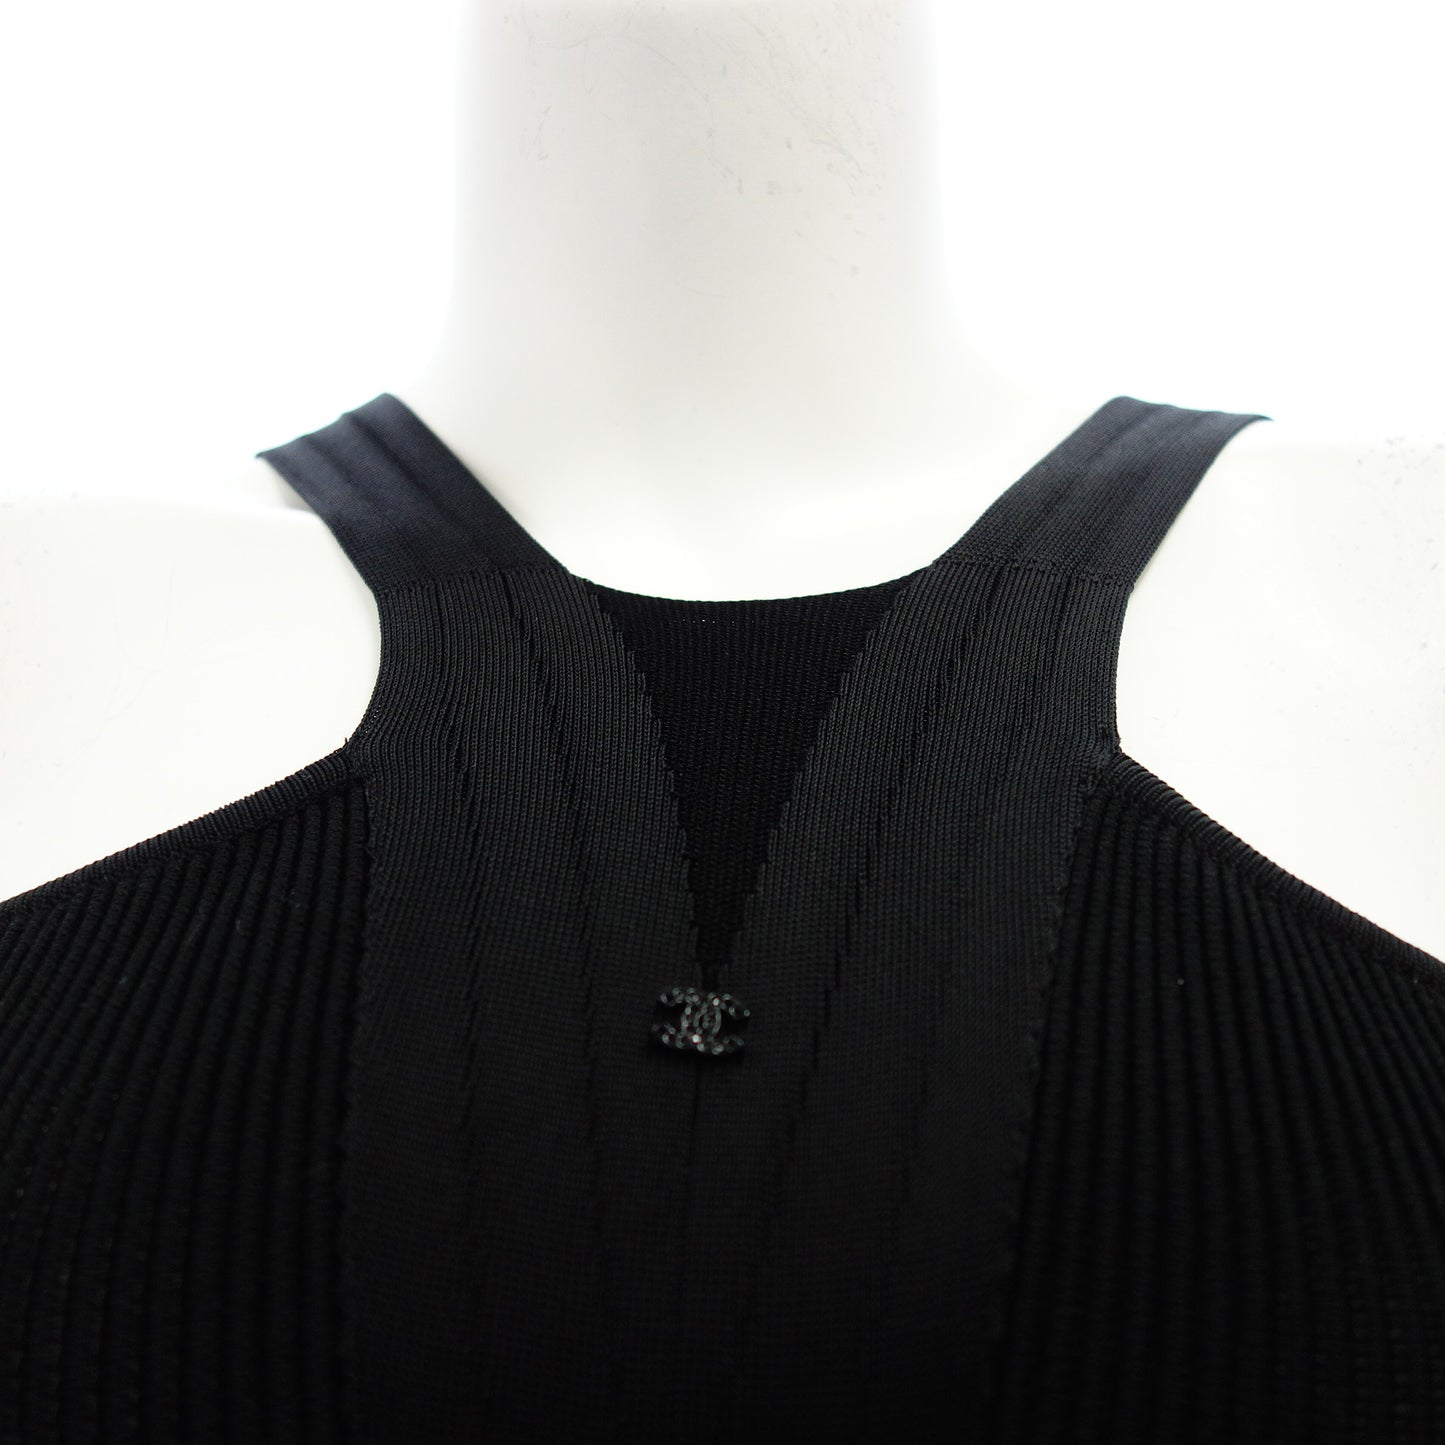 CHANEL One Piece Dress Black Size 38 Women's CHANEL [AFB26] [Used] 